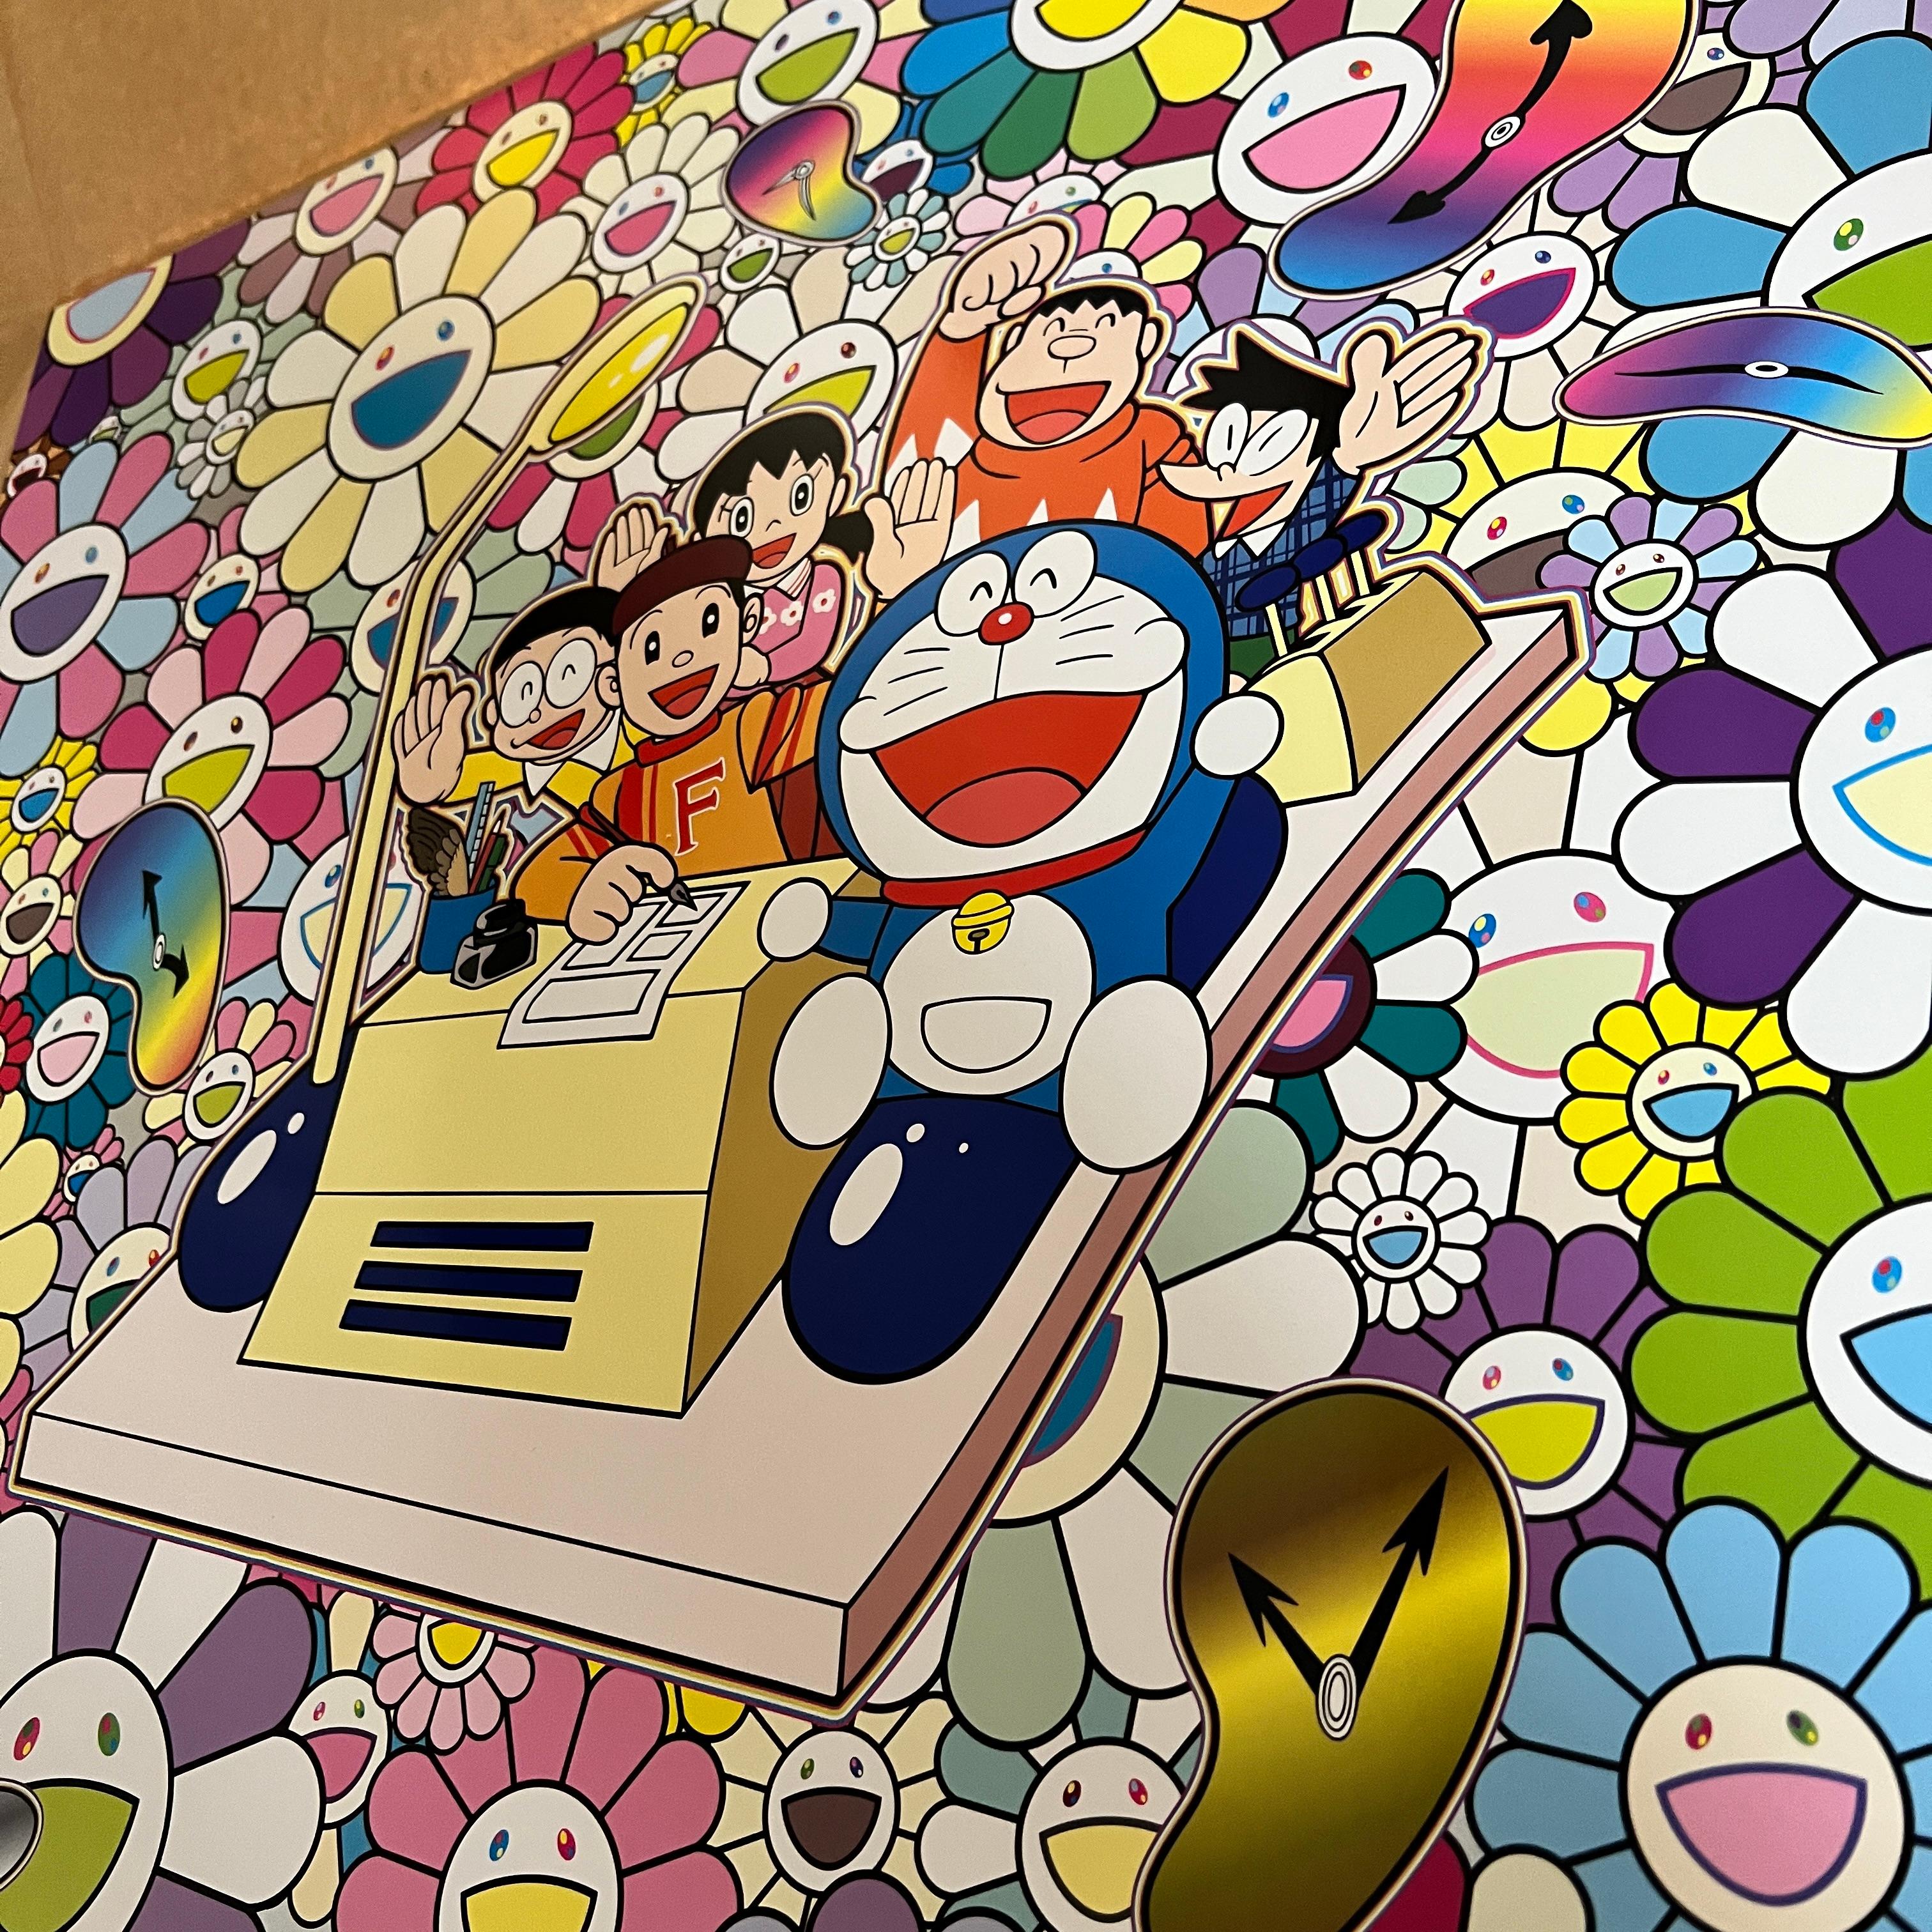 Artist: Takashi Murakami
Title: Let's Go on the Time Machine
Year: 2021
Edition: 300
Size: 600 × 600 mm
Medium: Offset print, cold stamp and high gloss varnishing

This is hand signed by Takashi Murakami.

Note: This will be shipped from Japan so